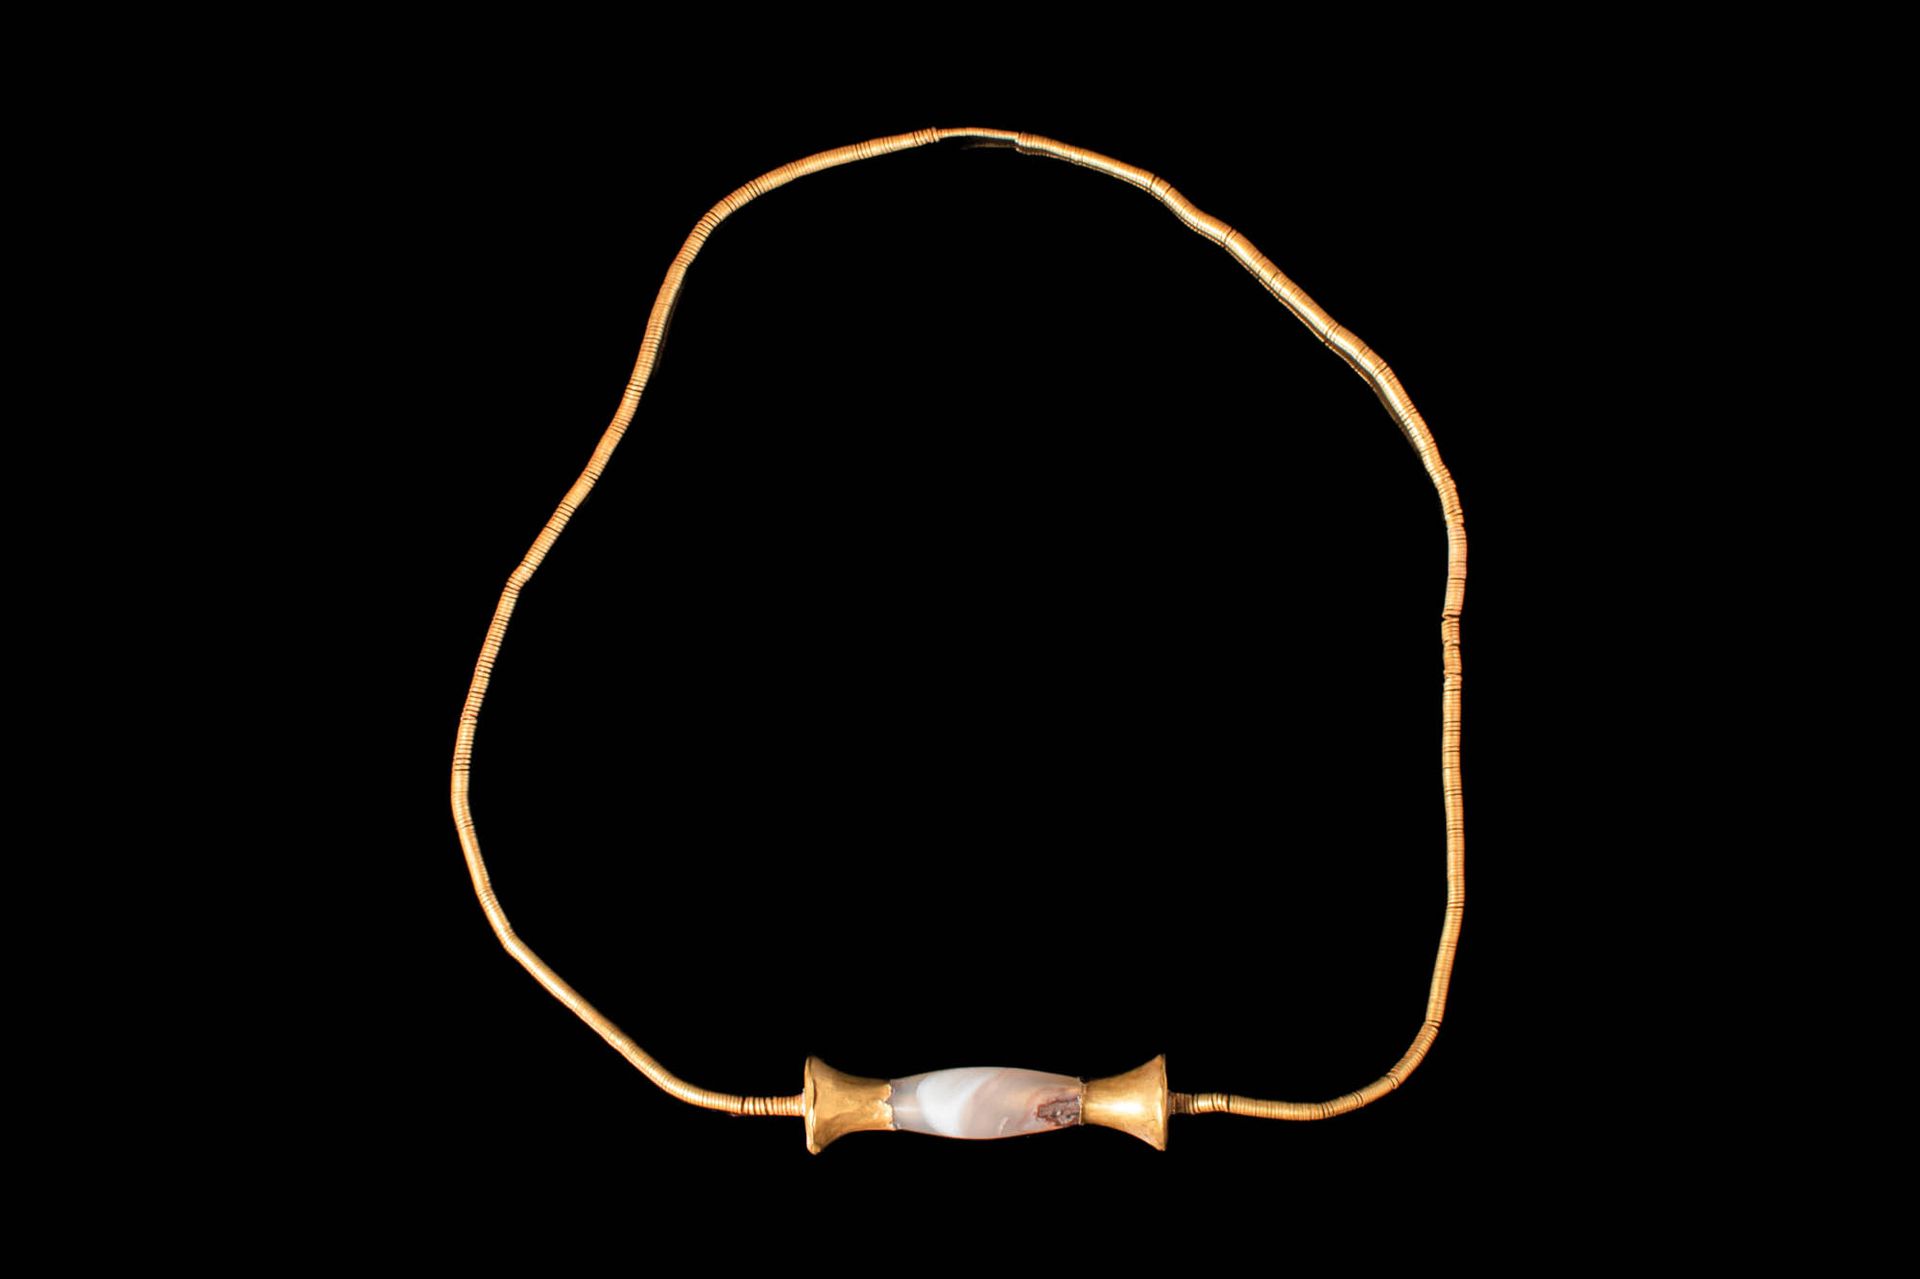 BACTRIAN GOLD NECKLACE WITH AGATE AND GOLD BEADS CA. 2300 - 1800 BC.
A gorgeous &hellip;